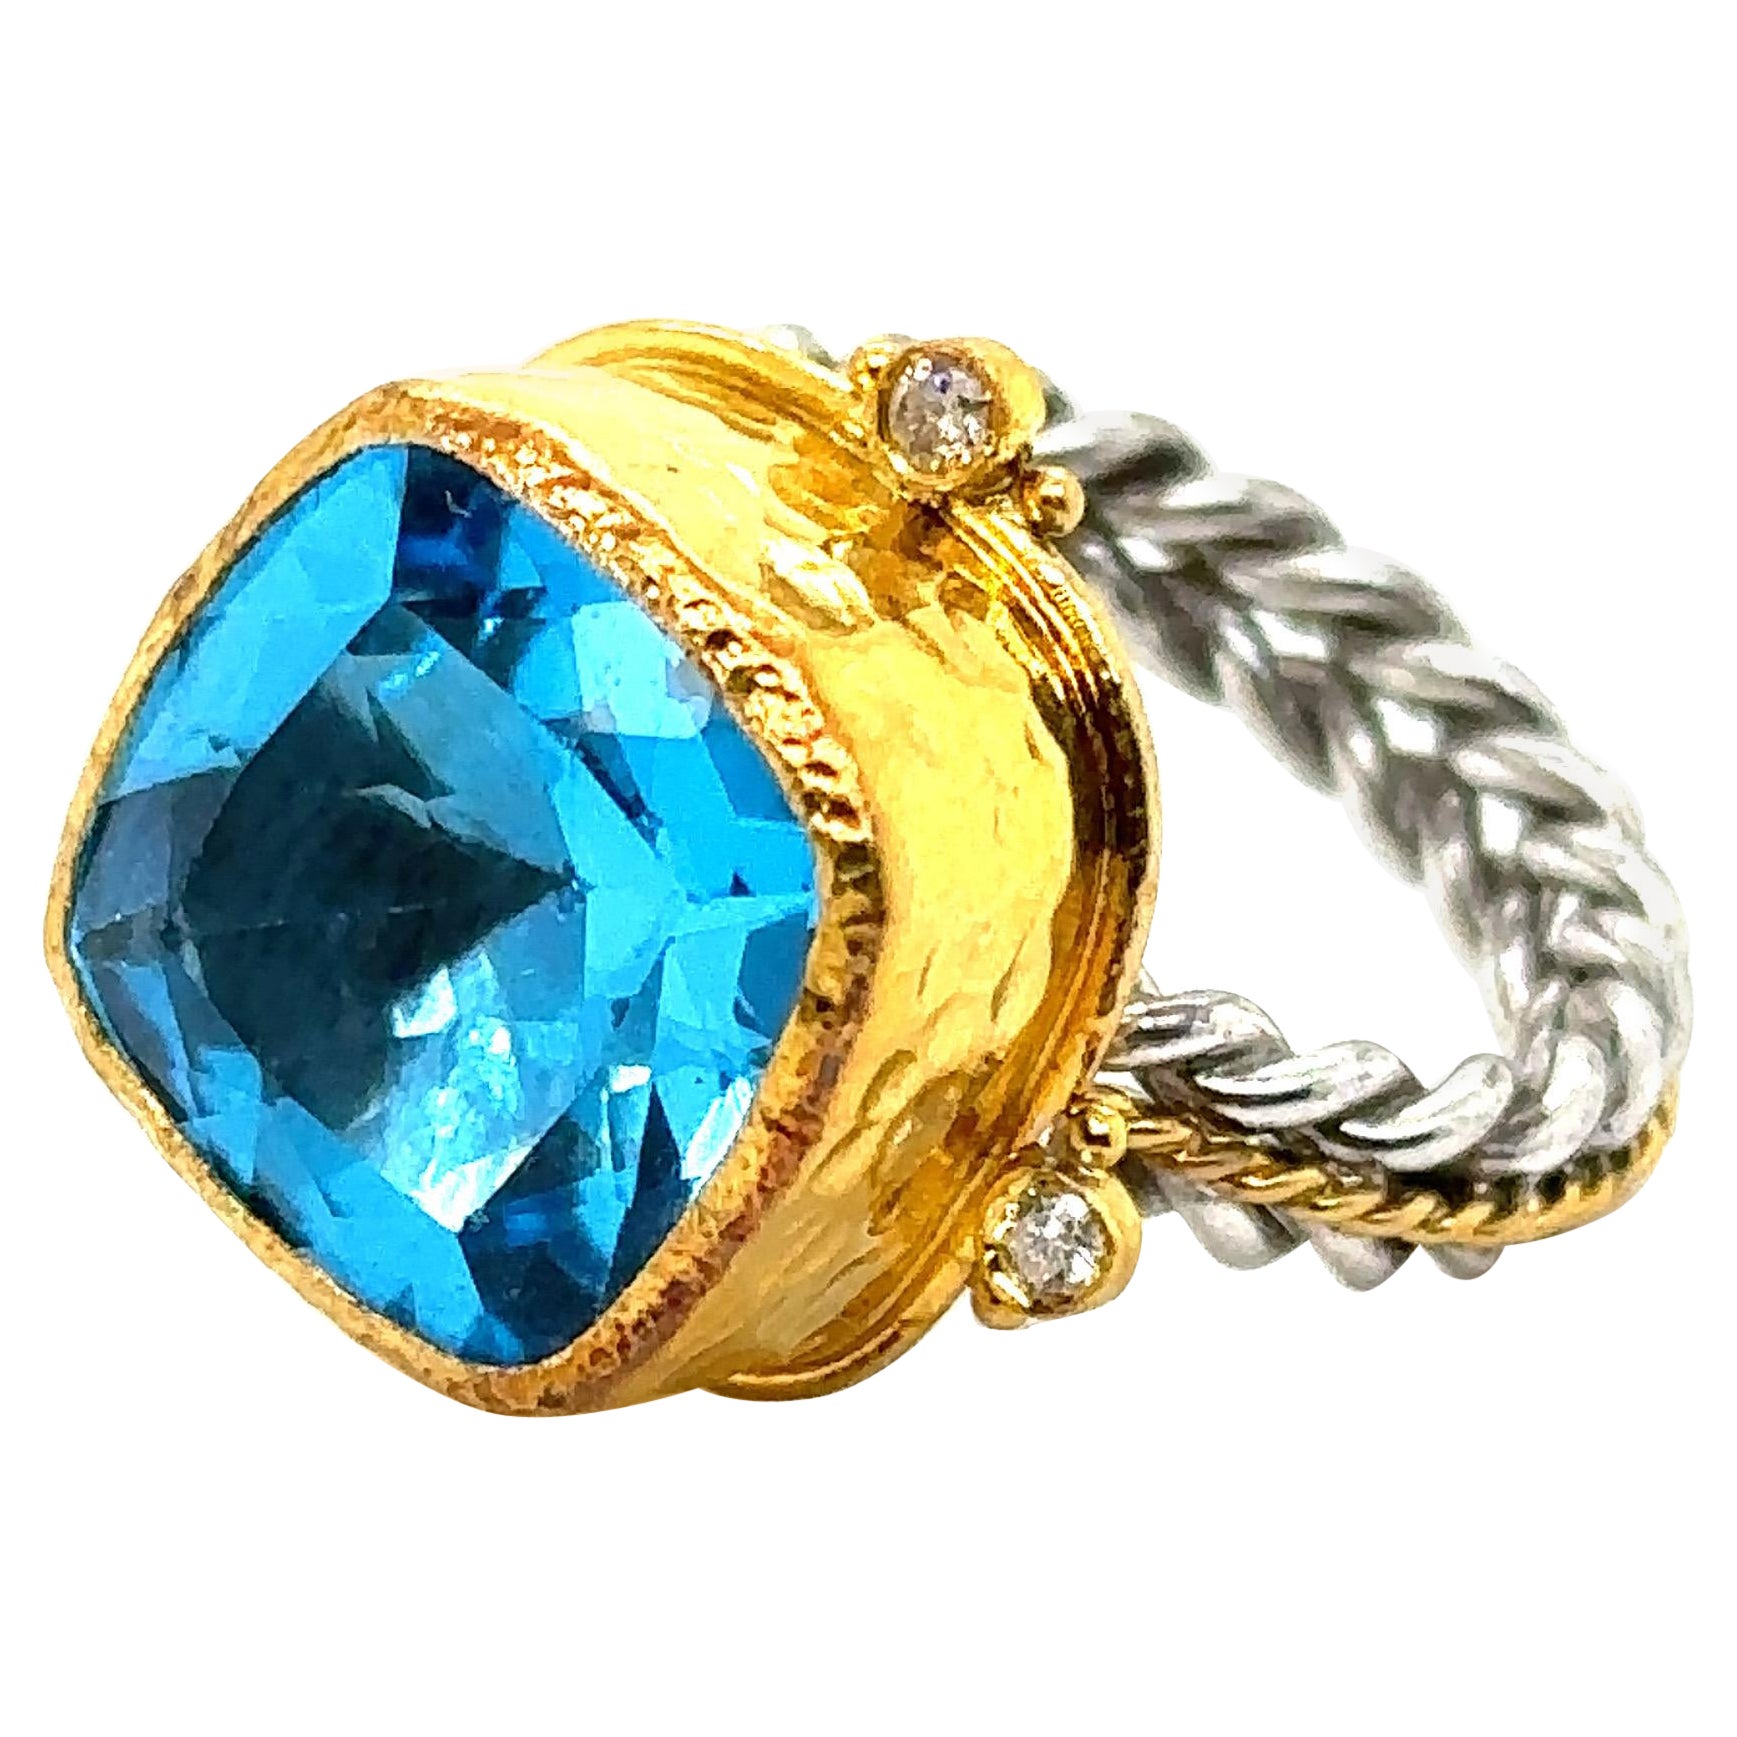 JAS-19-1995 - 24K GOLD/STERLING SILVER RING 0.10Ct DIAS.  For Sale